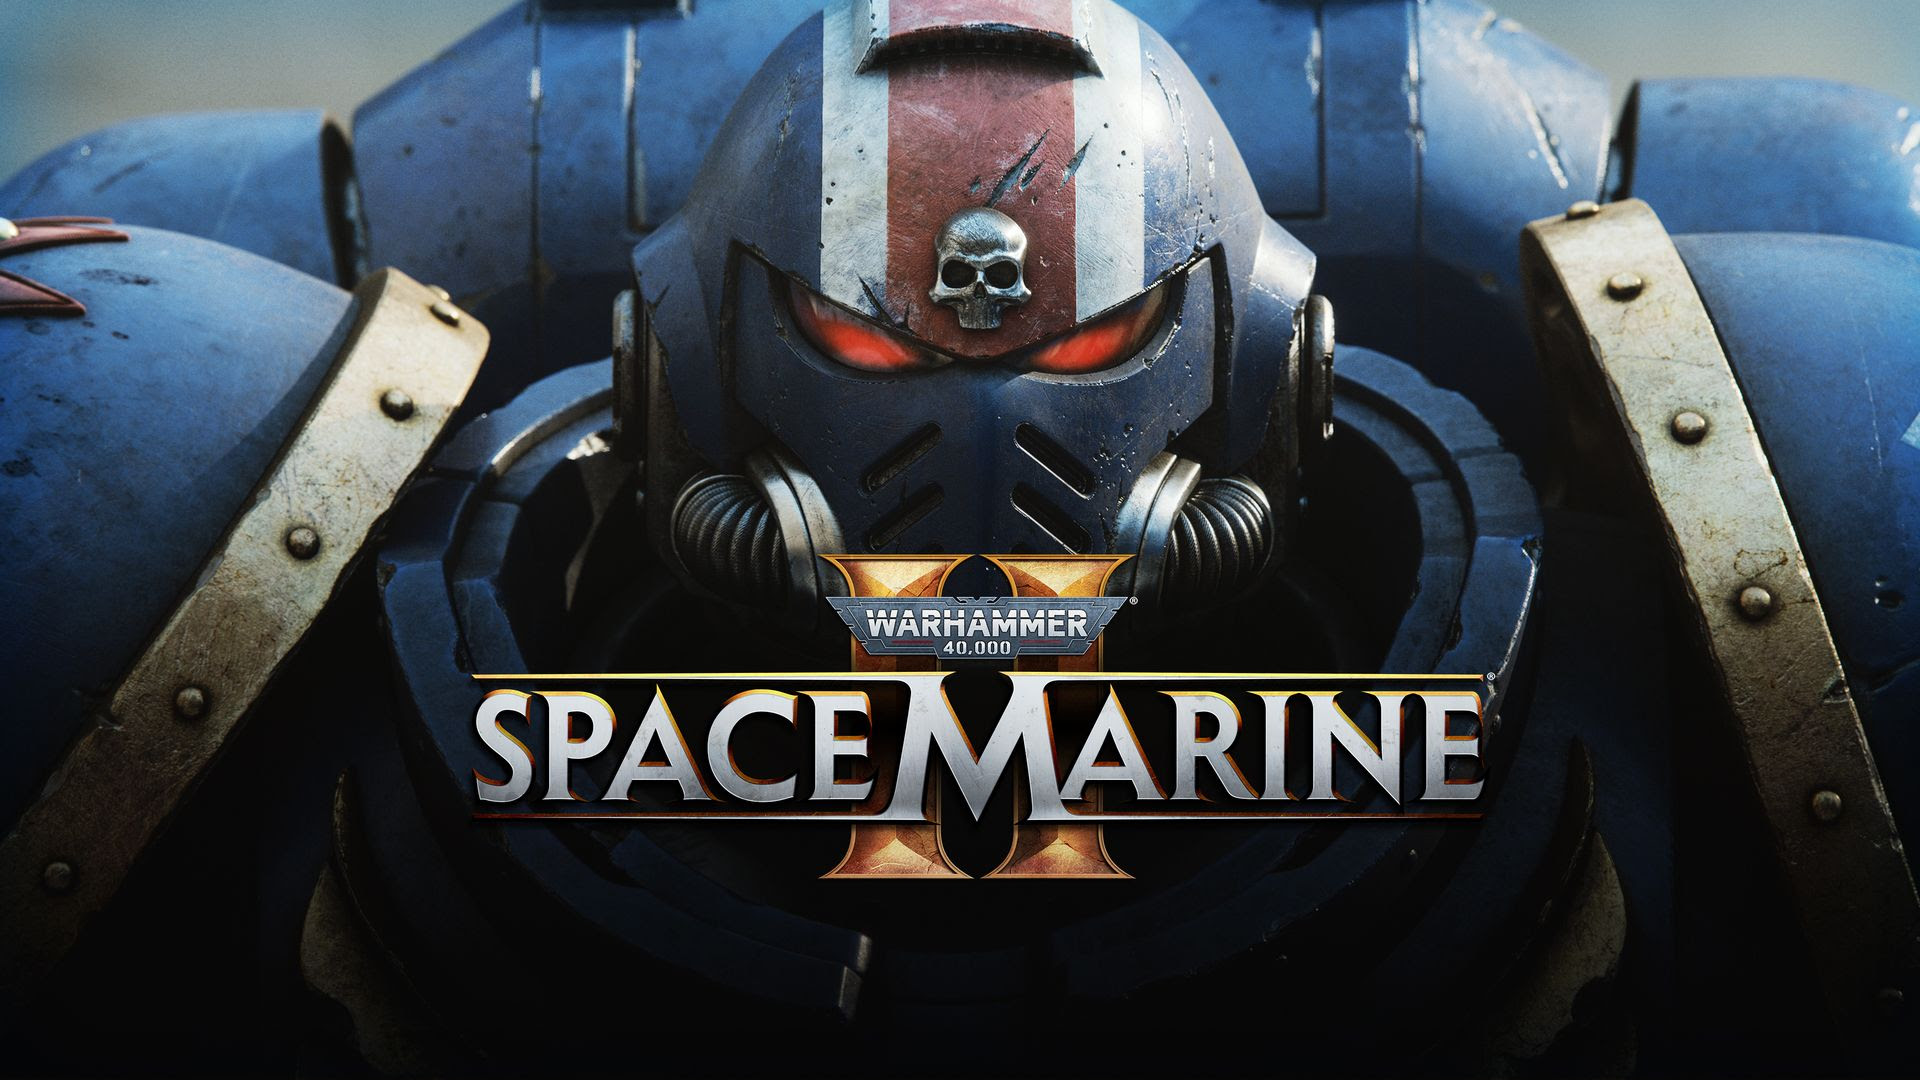 Warhammer 40K Space Marine gets a new look, and a late2024 release